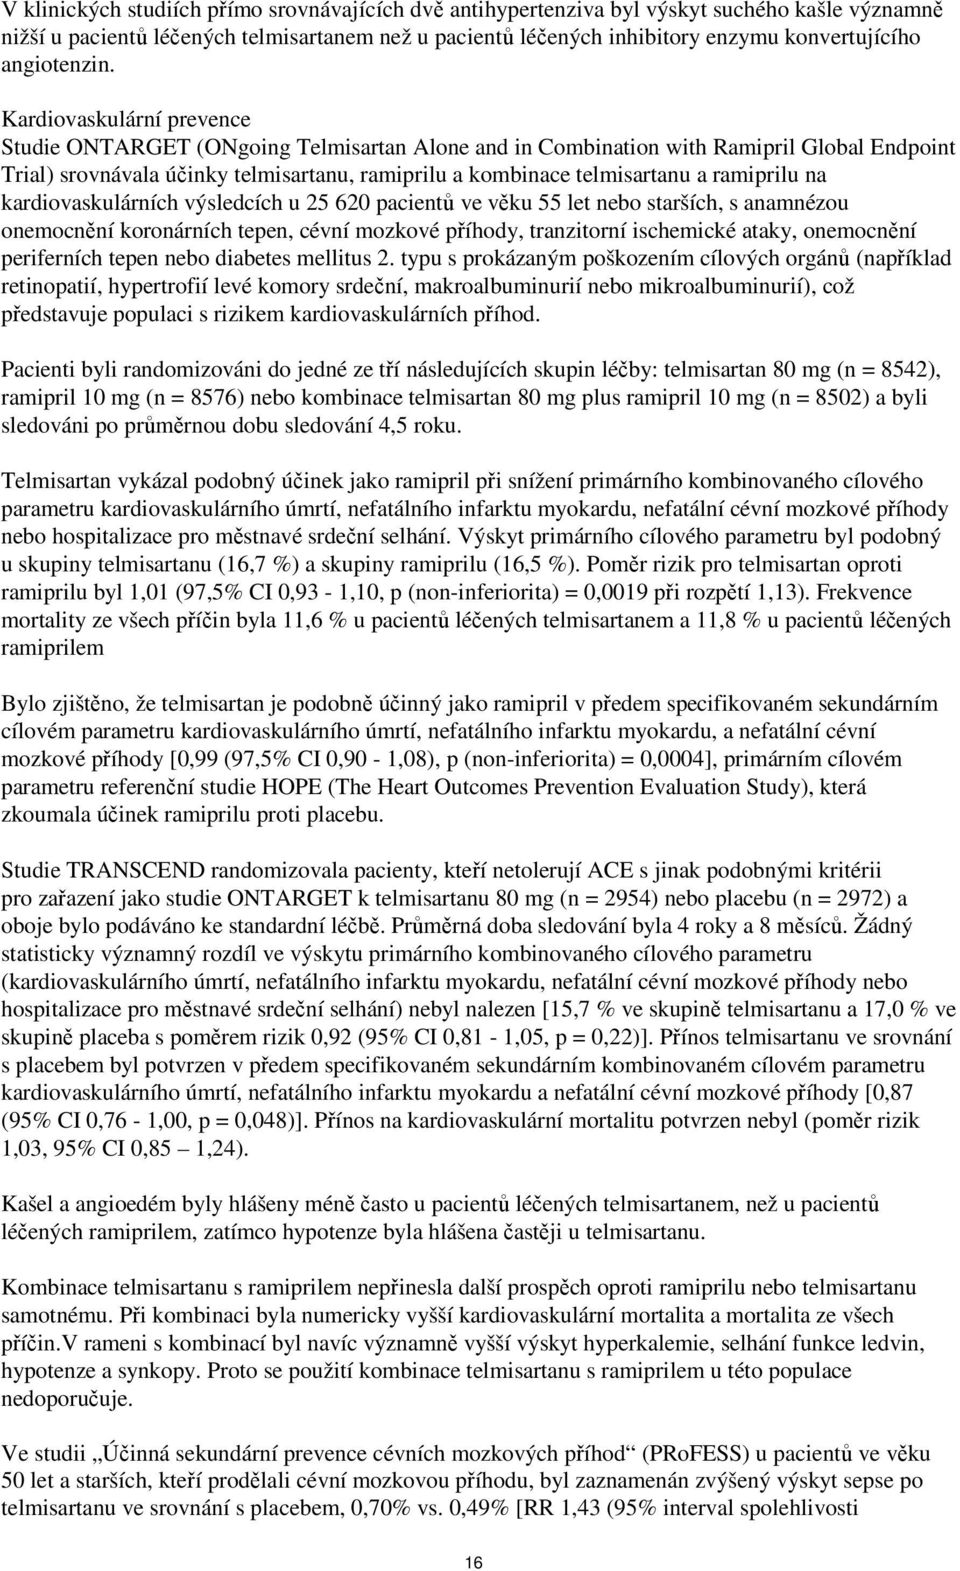 Kardiovaskulární prevence Studie ONTARGET (ONgoing Telmisartan Alone and in Combination with Ramipril Global Endpoint Trial) srovnávala účinky telmisartanu, ramiprilu a kombinace telmisartanu a